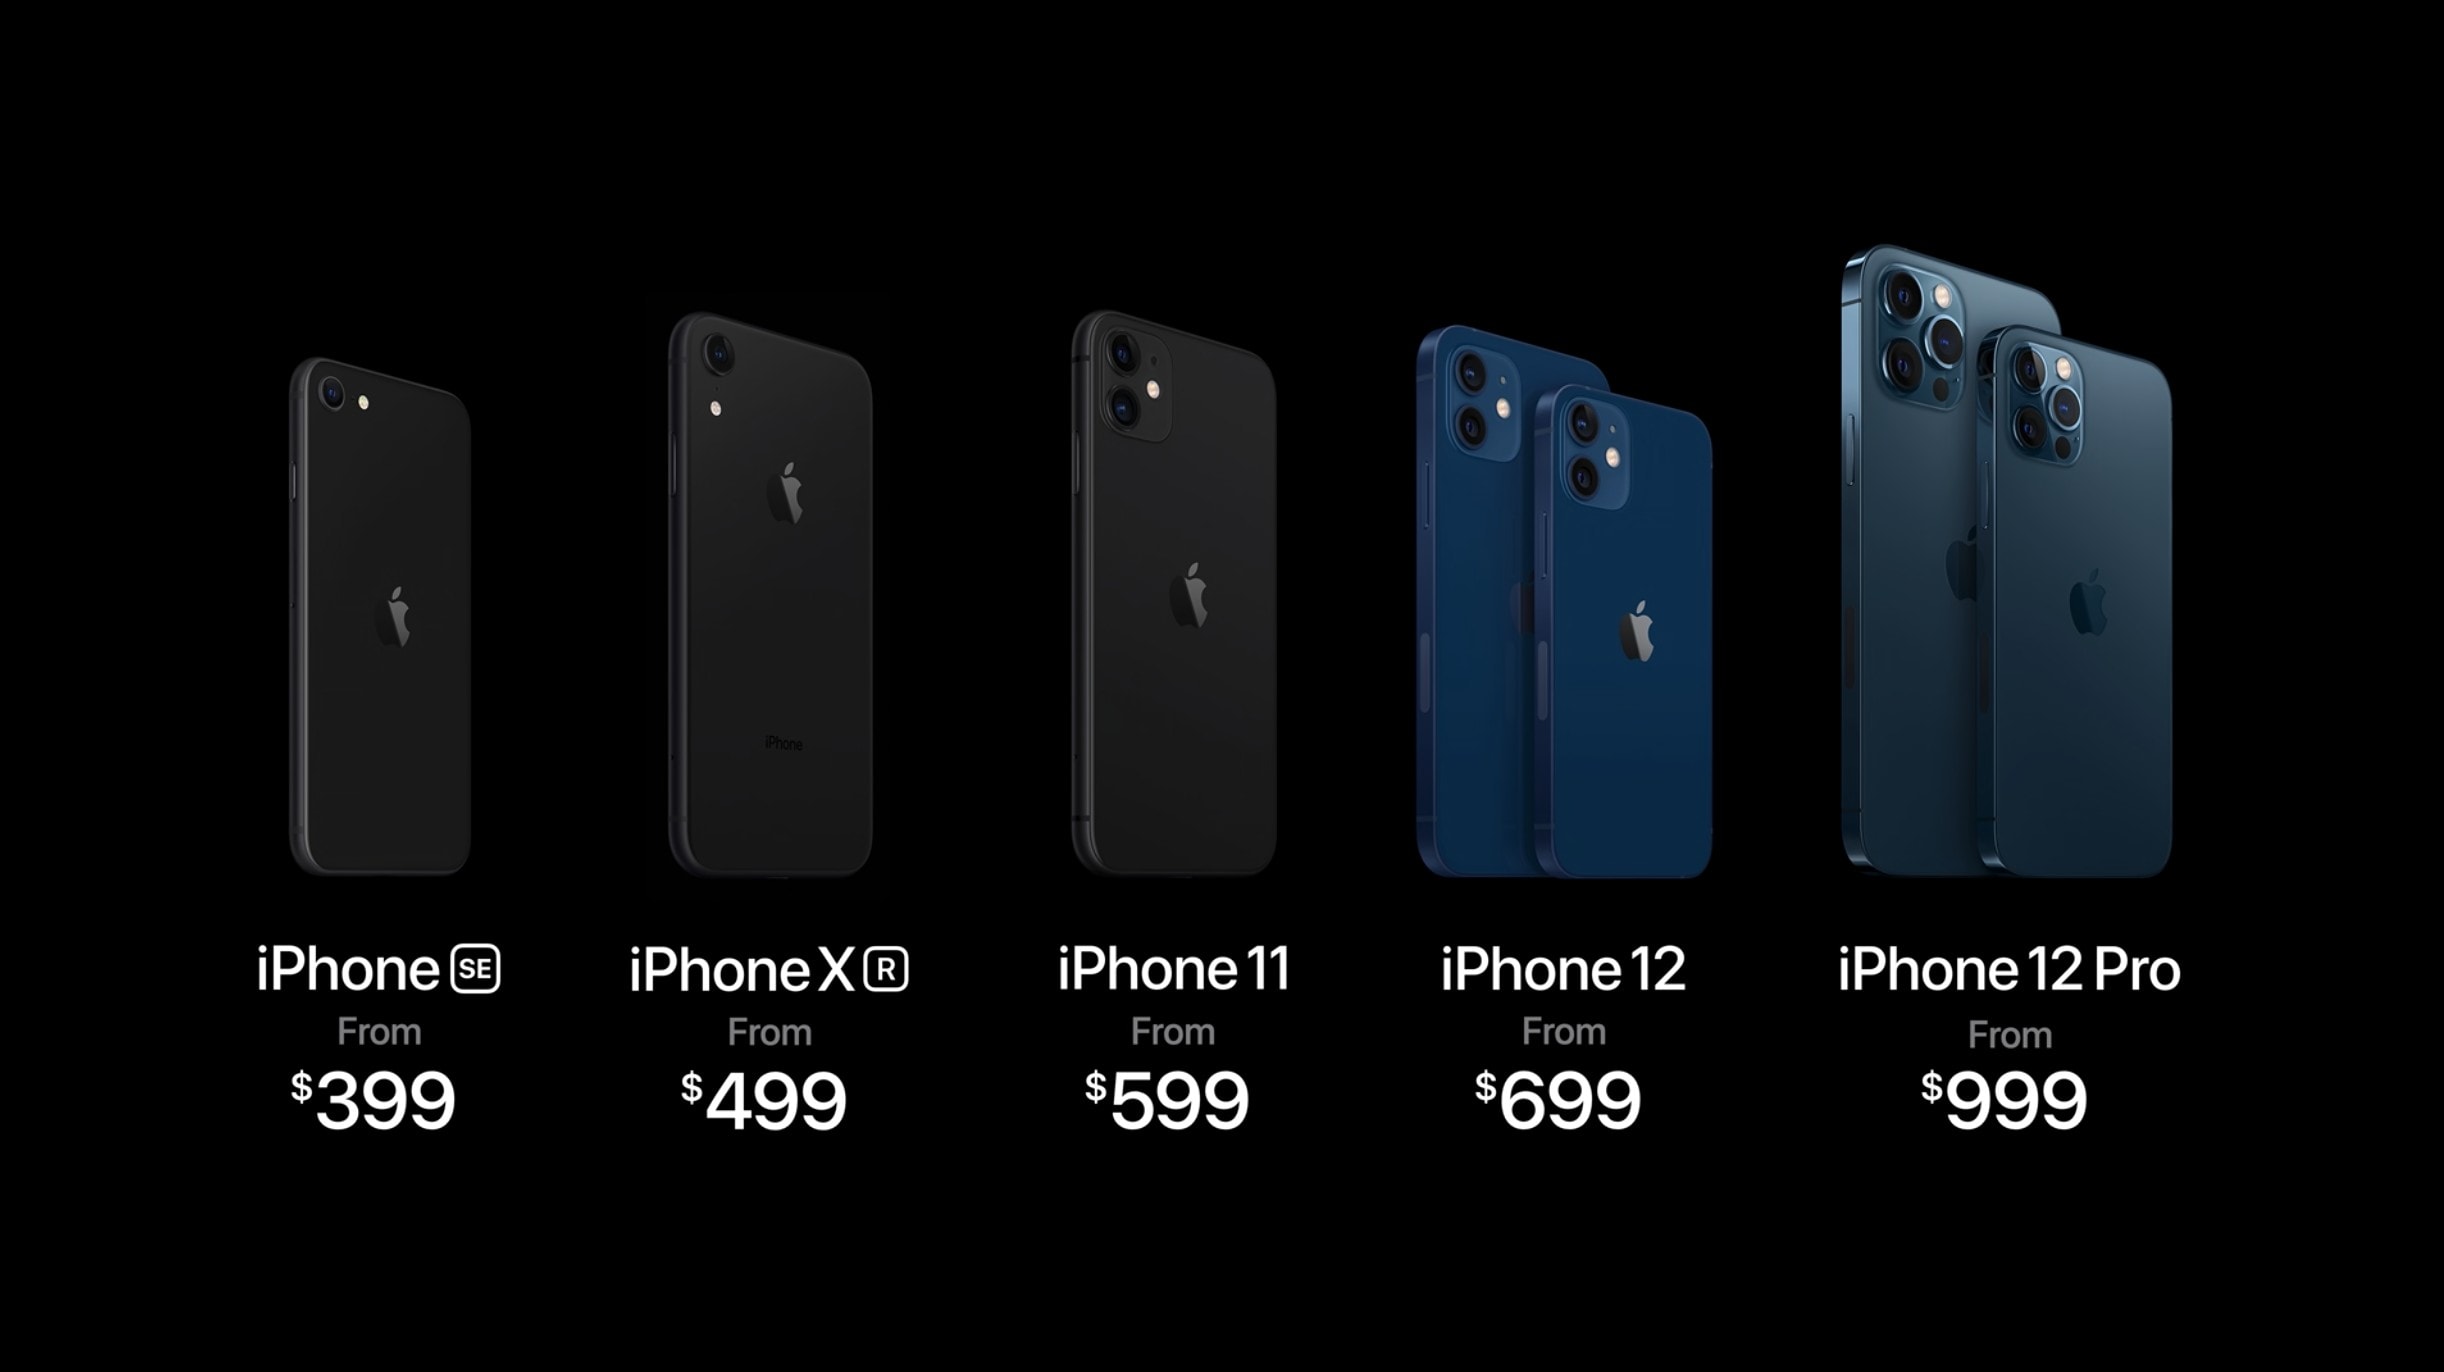 Apple finally sorted out naming for this year's iPhones